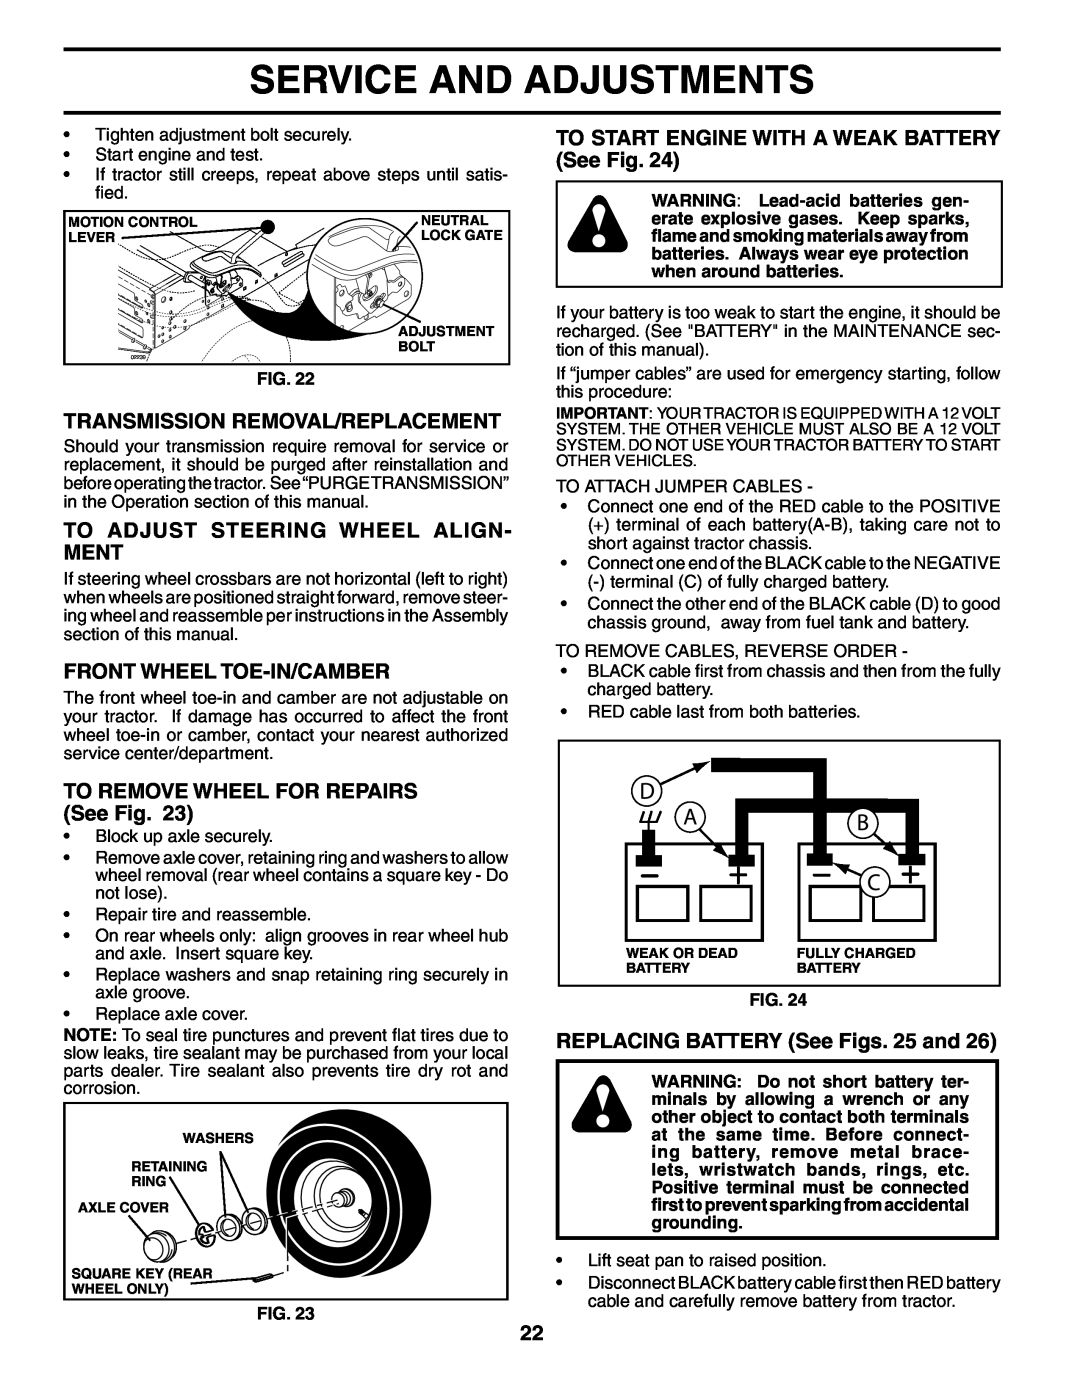 Weed Eater WET17H42STA Transmission Removal/Replacement, To Adjust Steering Wheel Align- Ment, Front Wheel Toe-In/Camber 